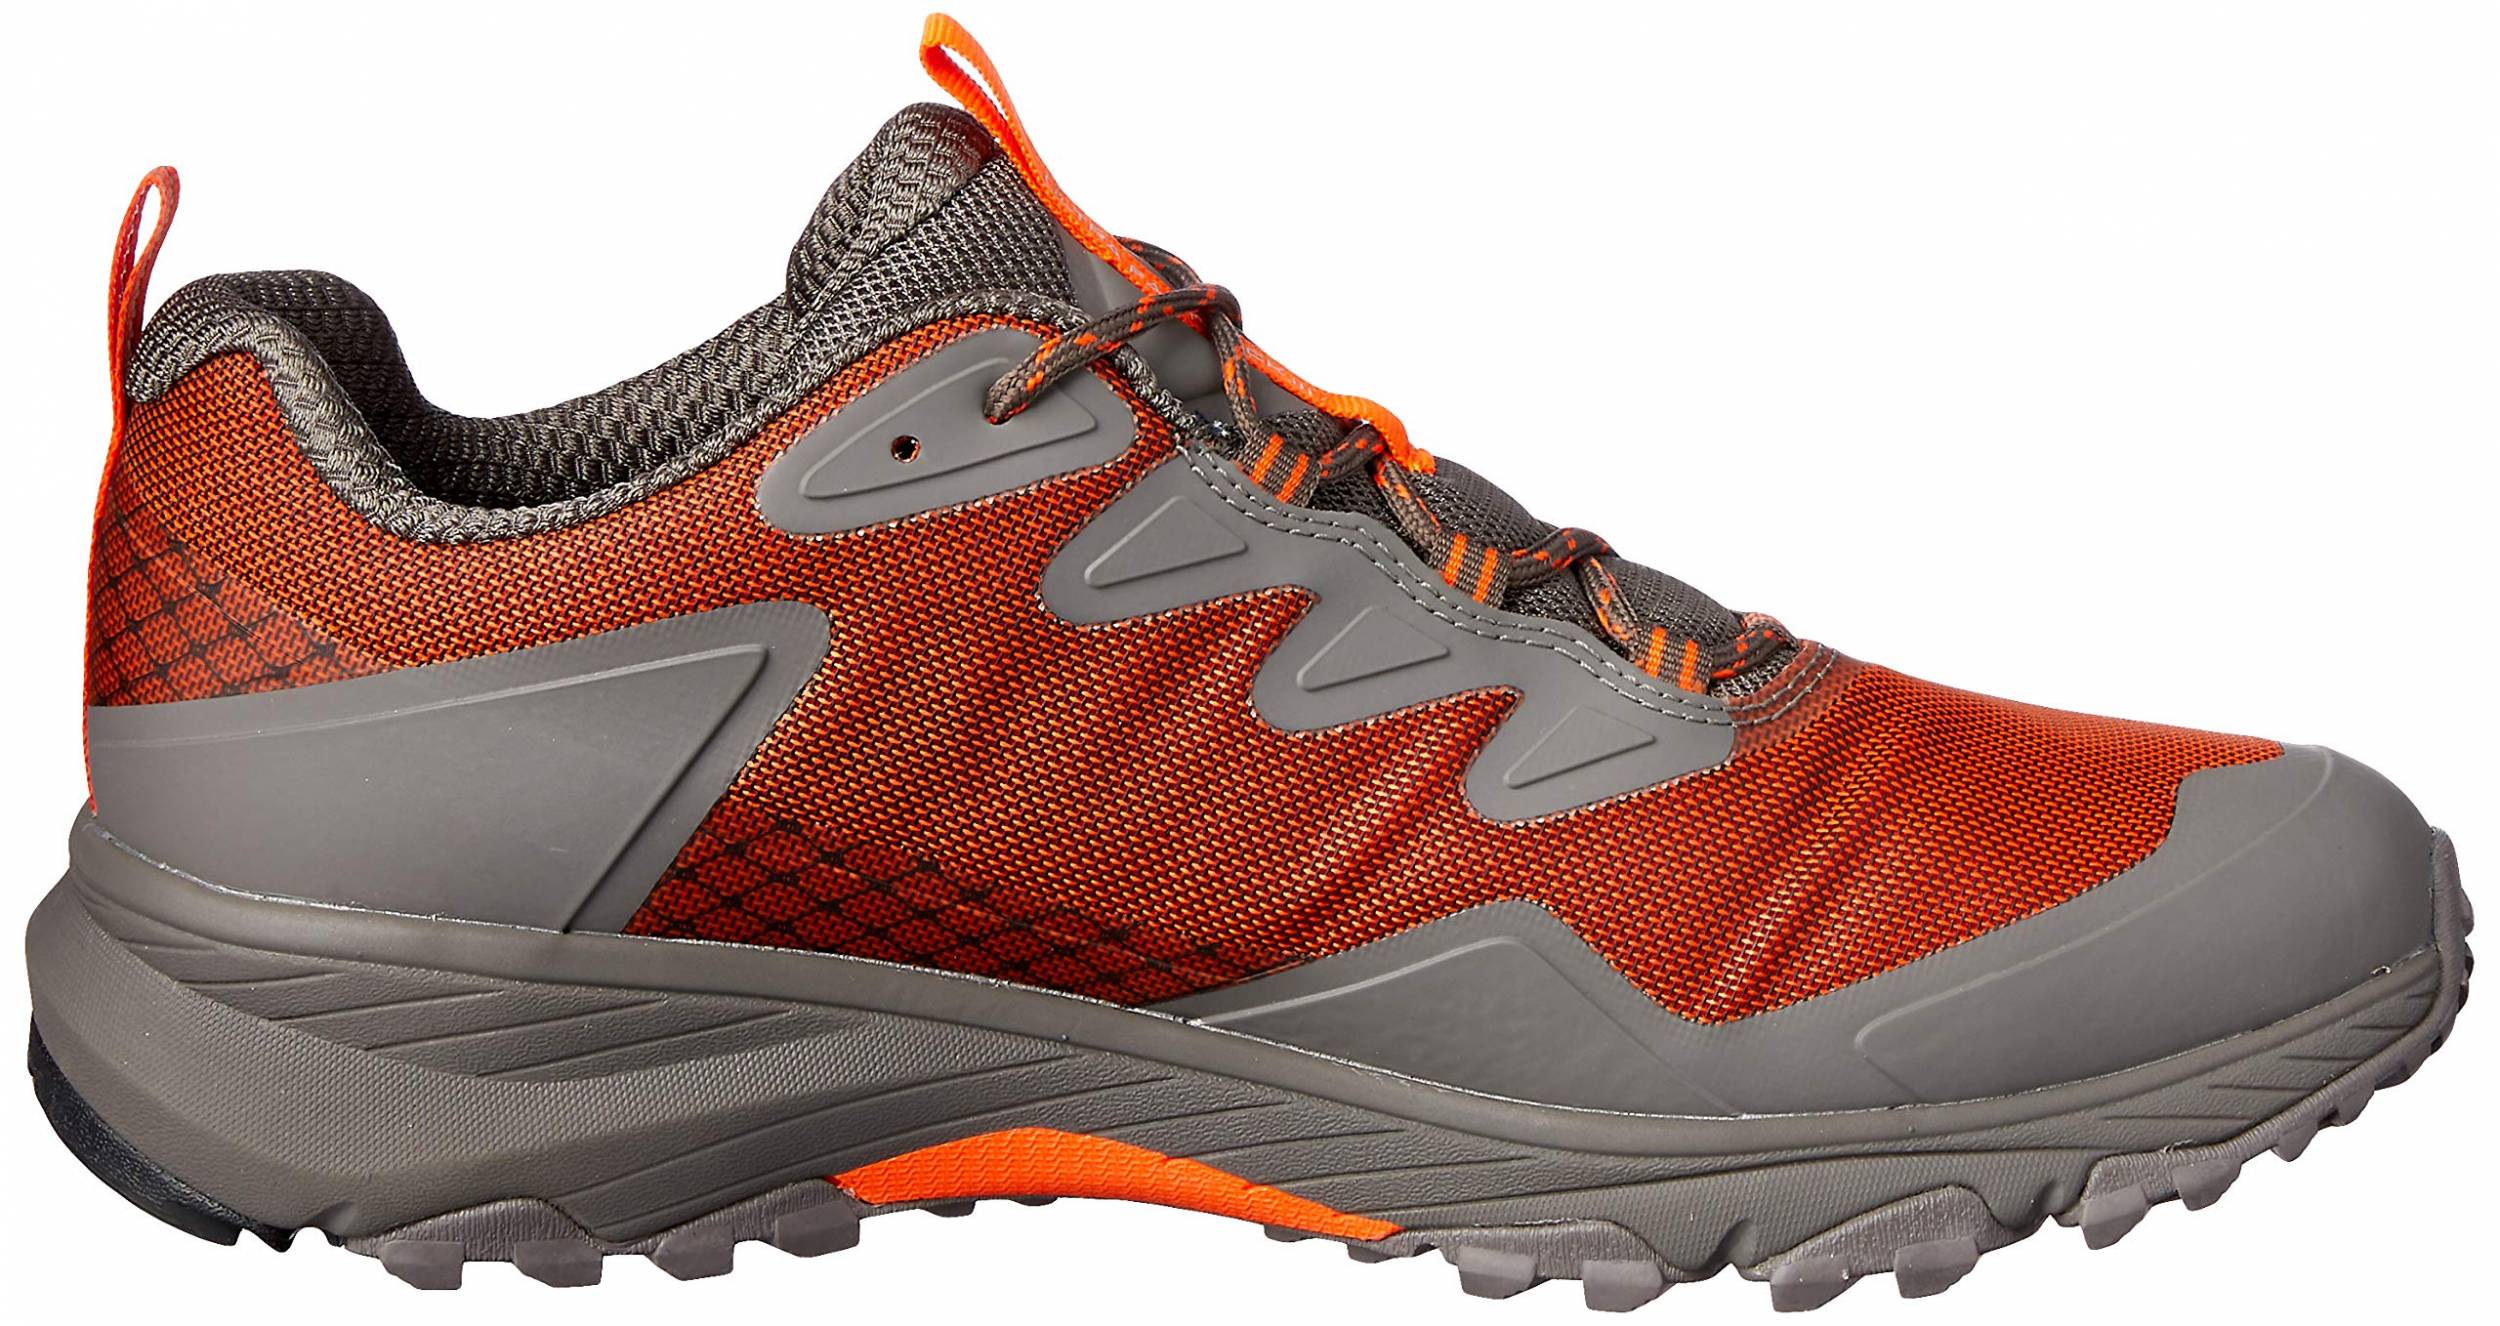 The North Face Ultra Fastpack III GTX 